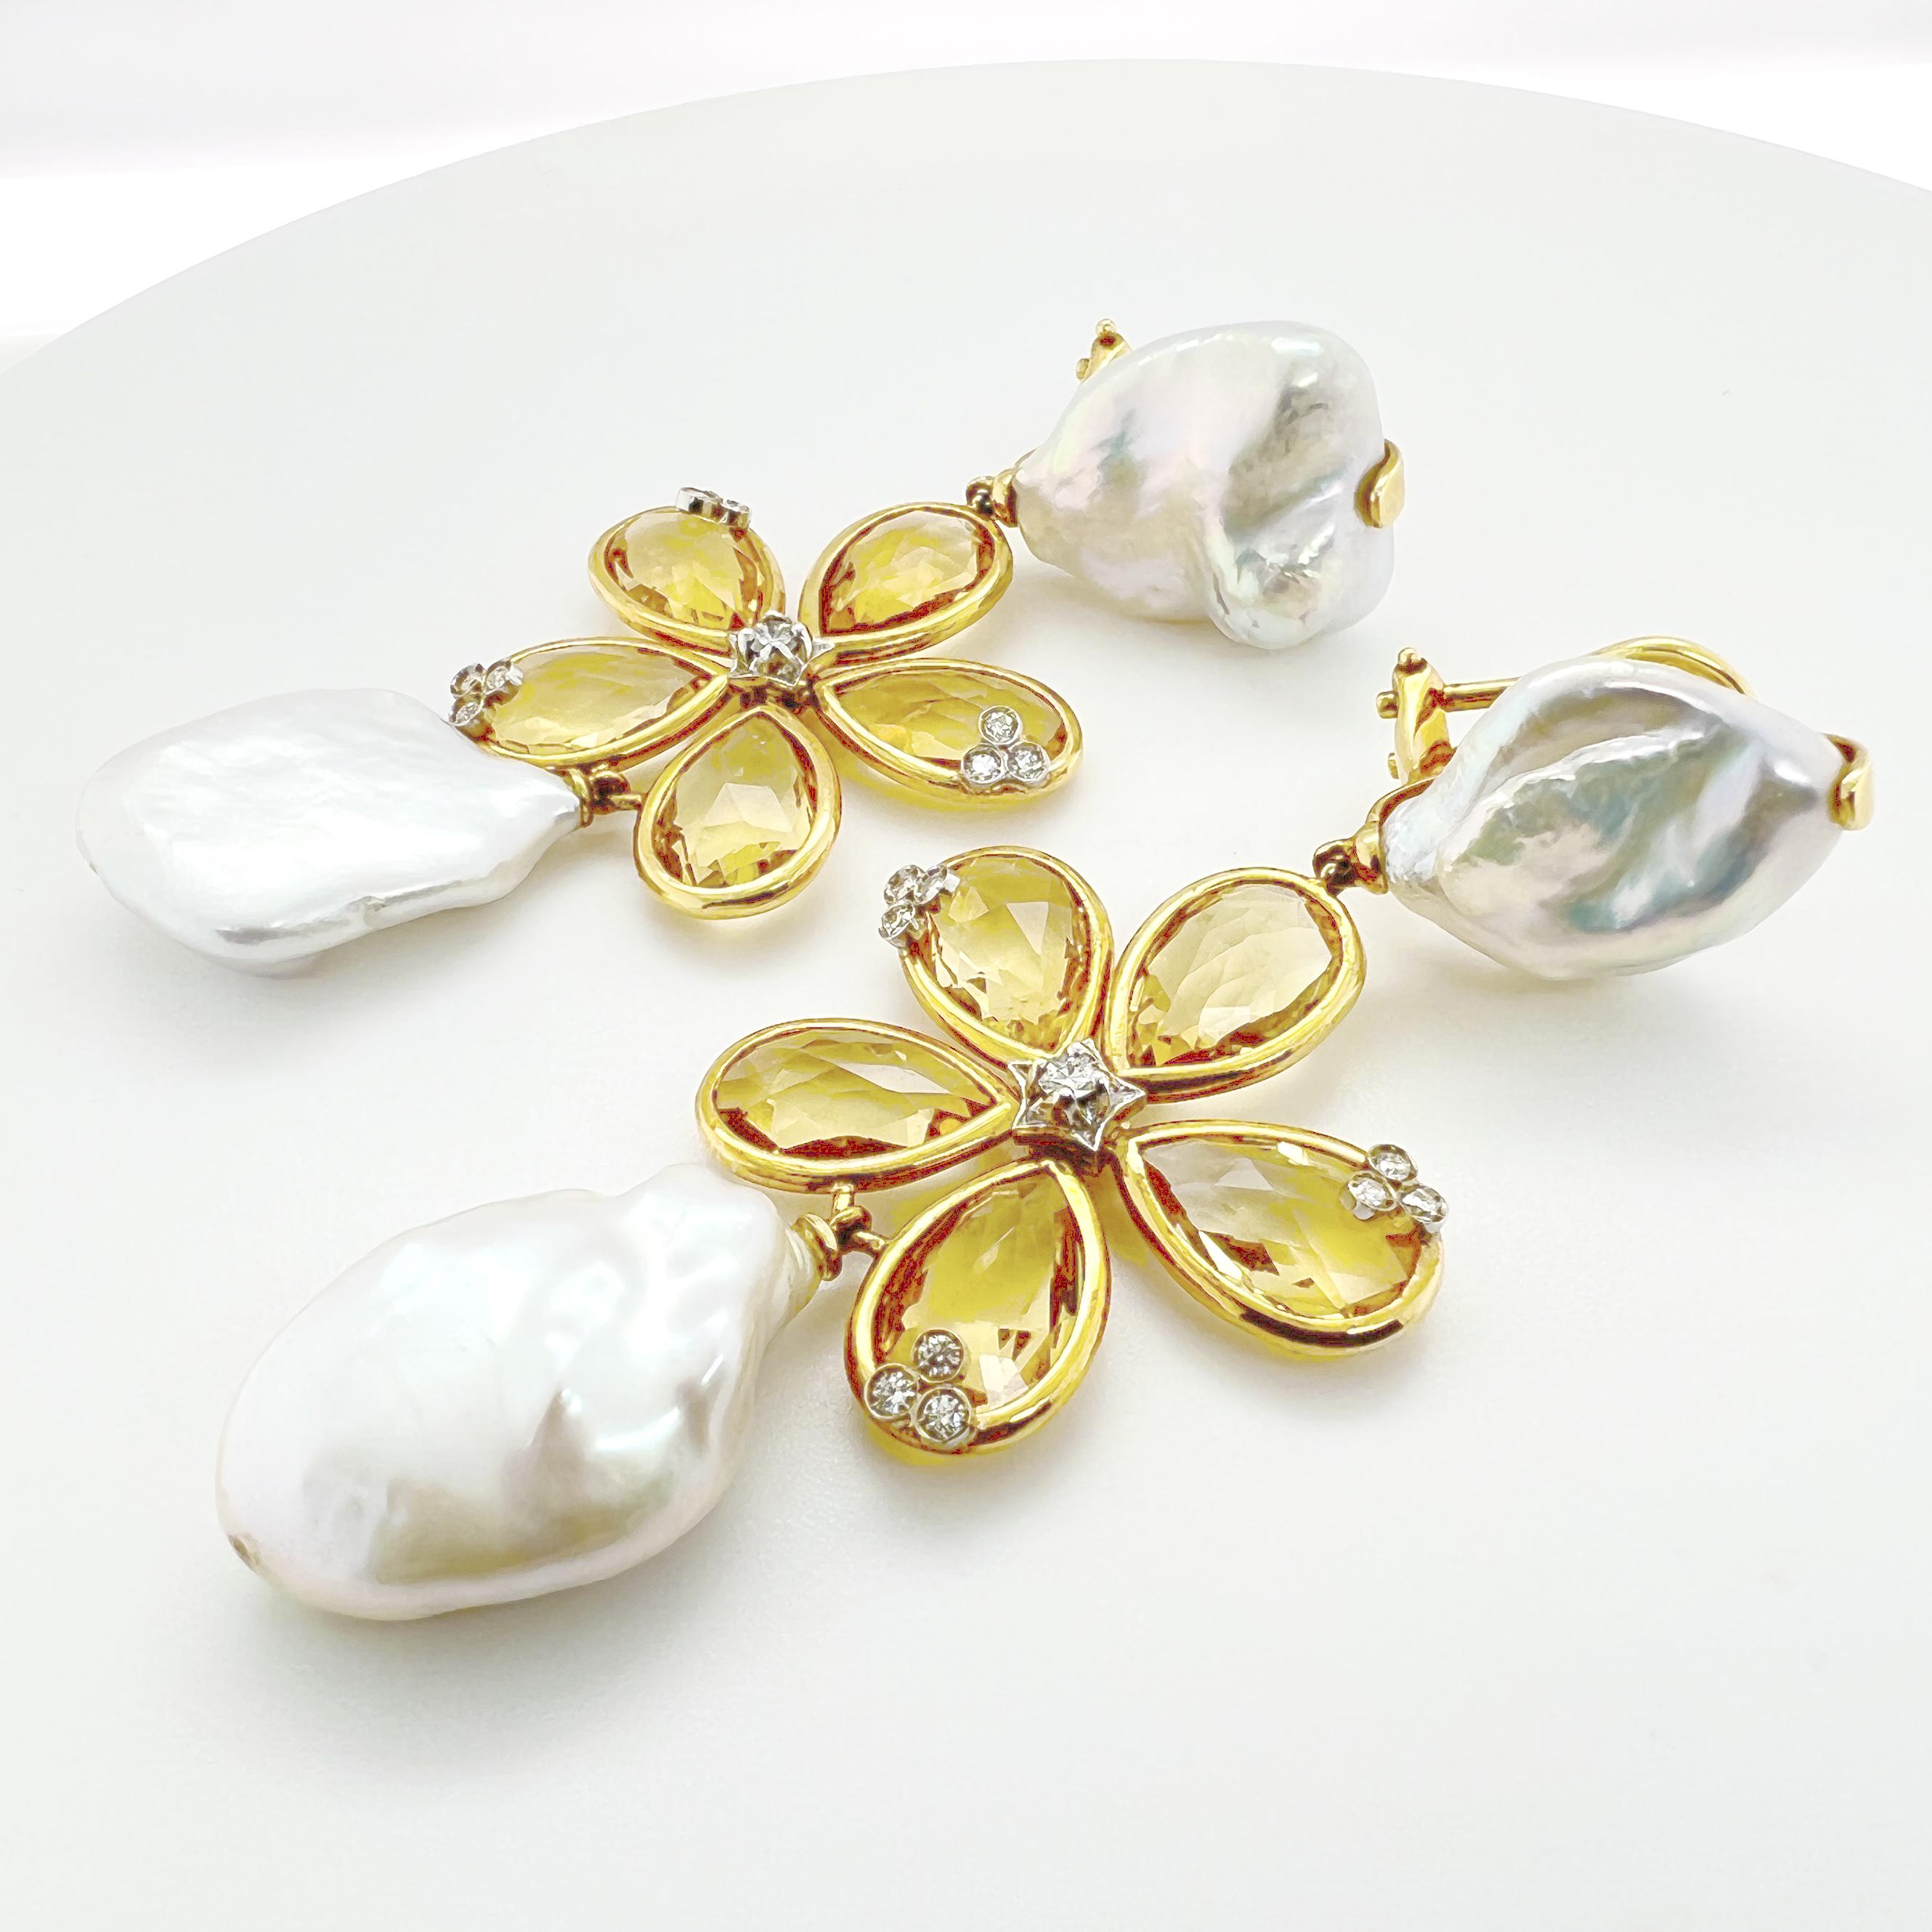 This 18kt yellow gold bracelet features a delicate flower design with citrine quartz, pearls, and diamonds. The flower motif adds a whimsical and feminine touch to the bracelet, while the citrine quartz stones bring a vibrant and sunny yellow color